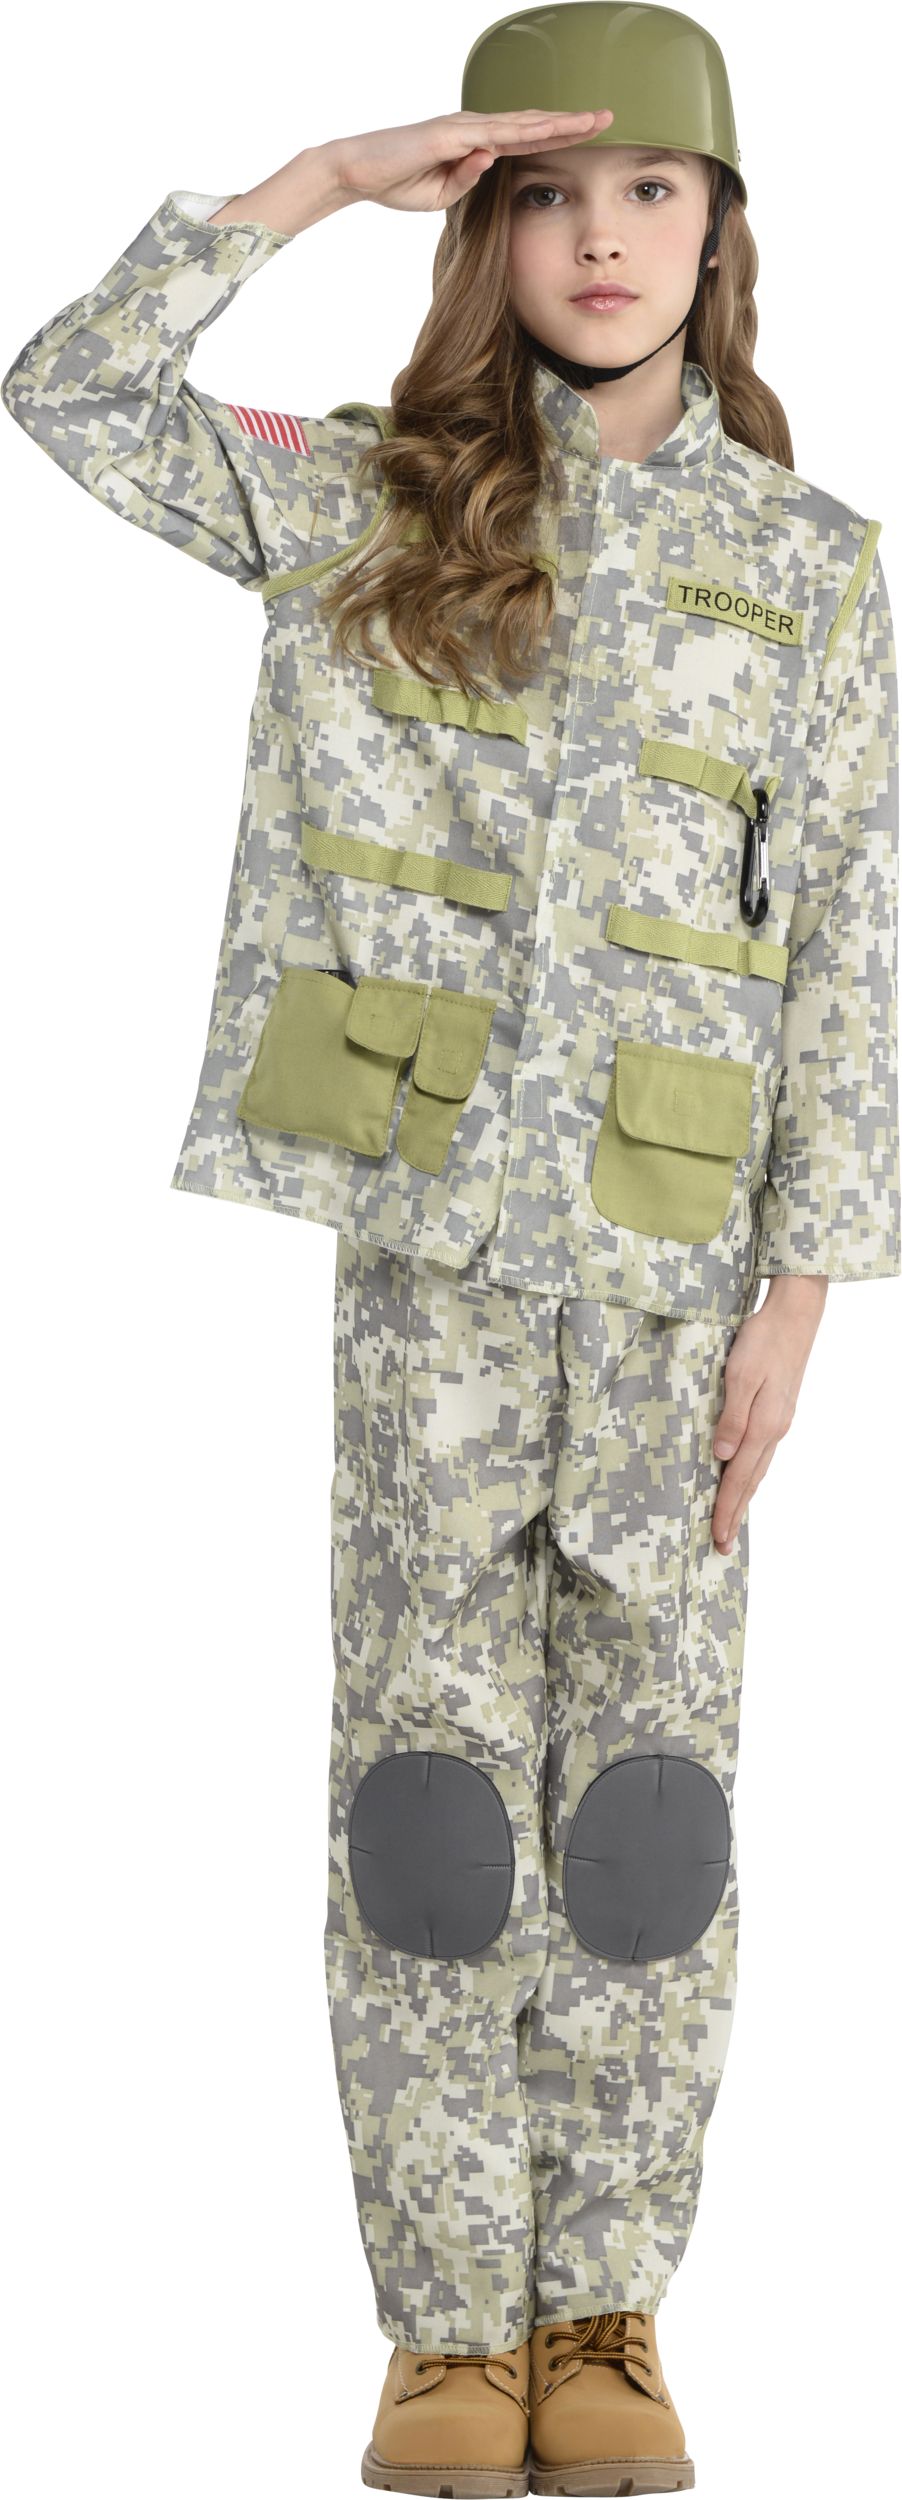 Boys Army Military Costume Child Camouflage Soldier Book Week Halloween  Uniform